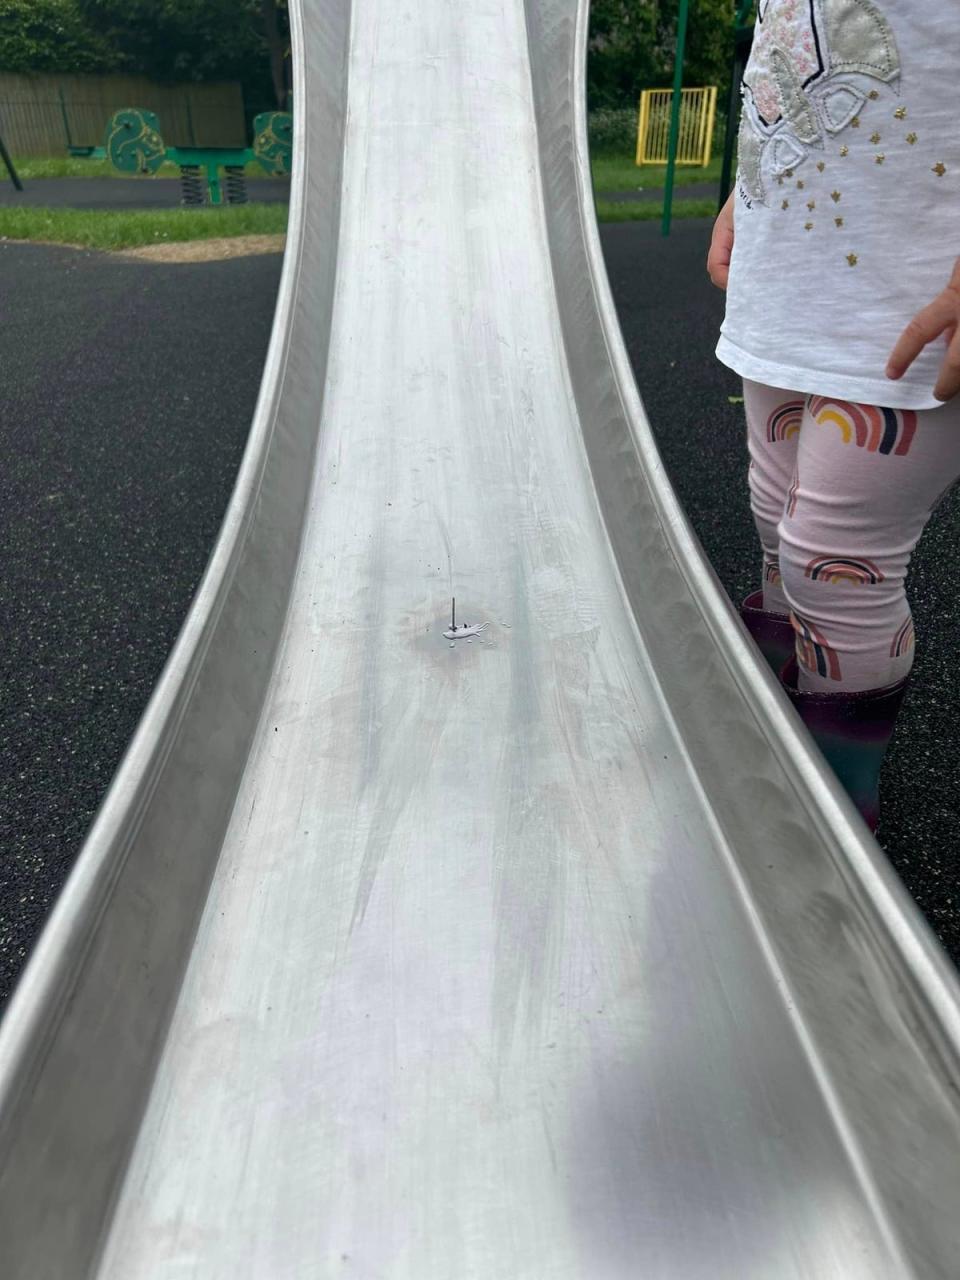 A nail glued to the Marcham Village slide (Supplied)